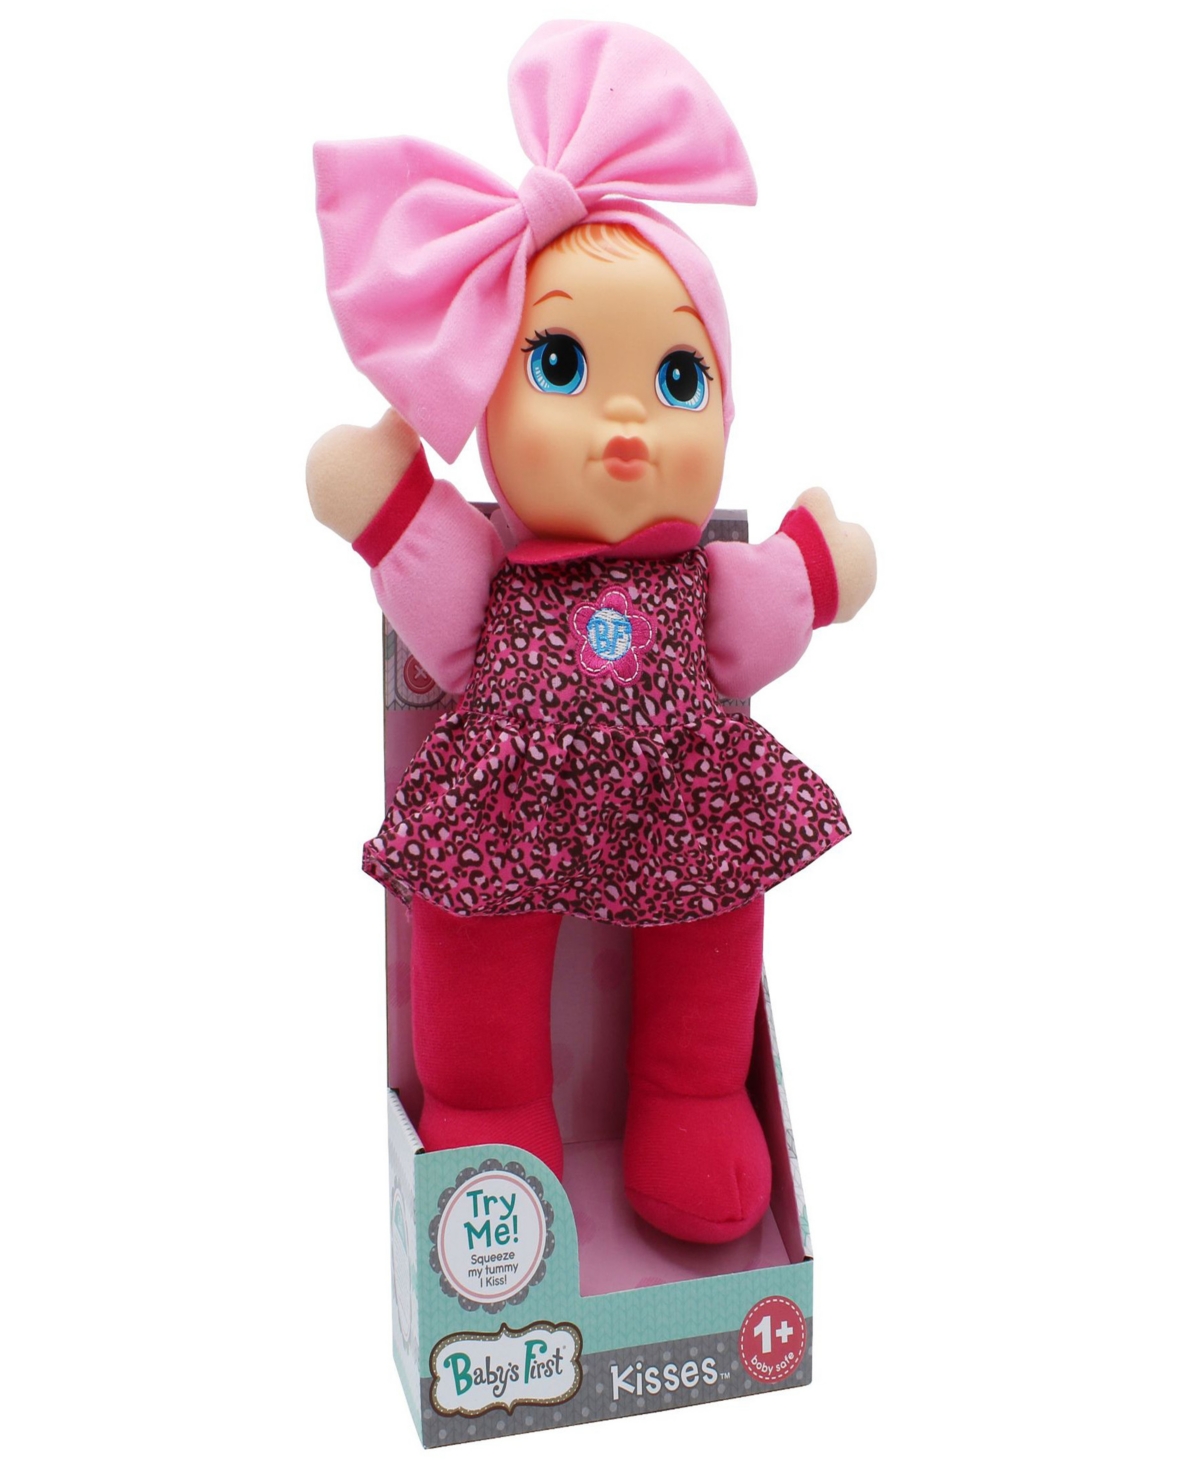 Baby's First By Nemcor Giggles Baby Doll Toy With Coral Top In Multi